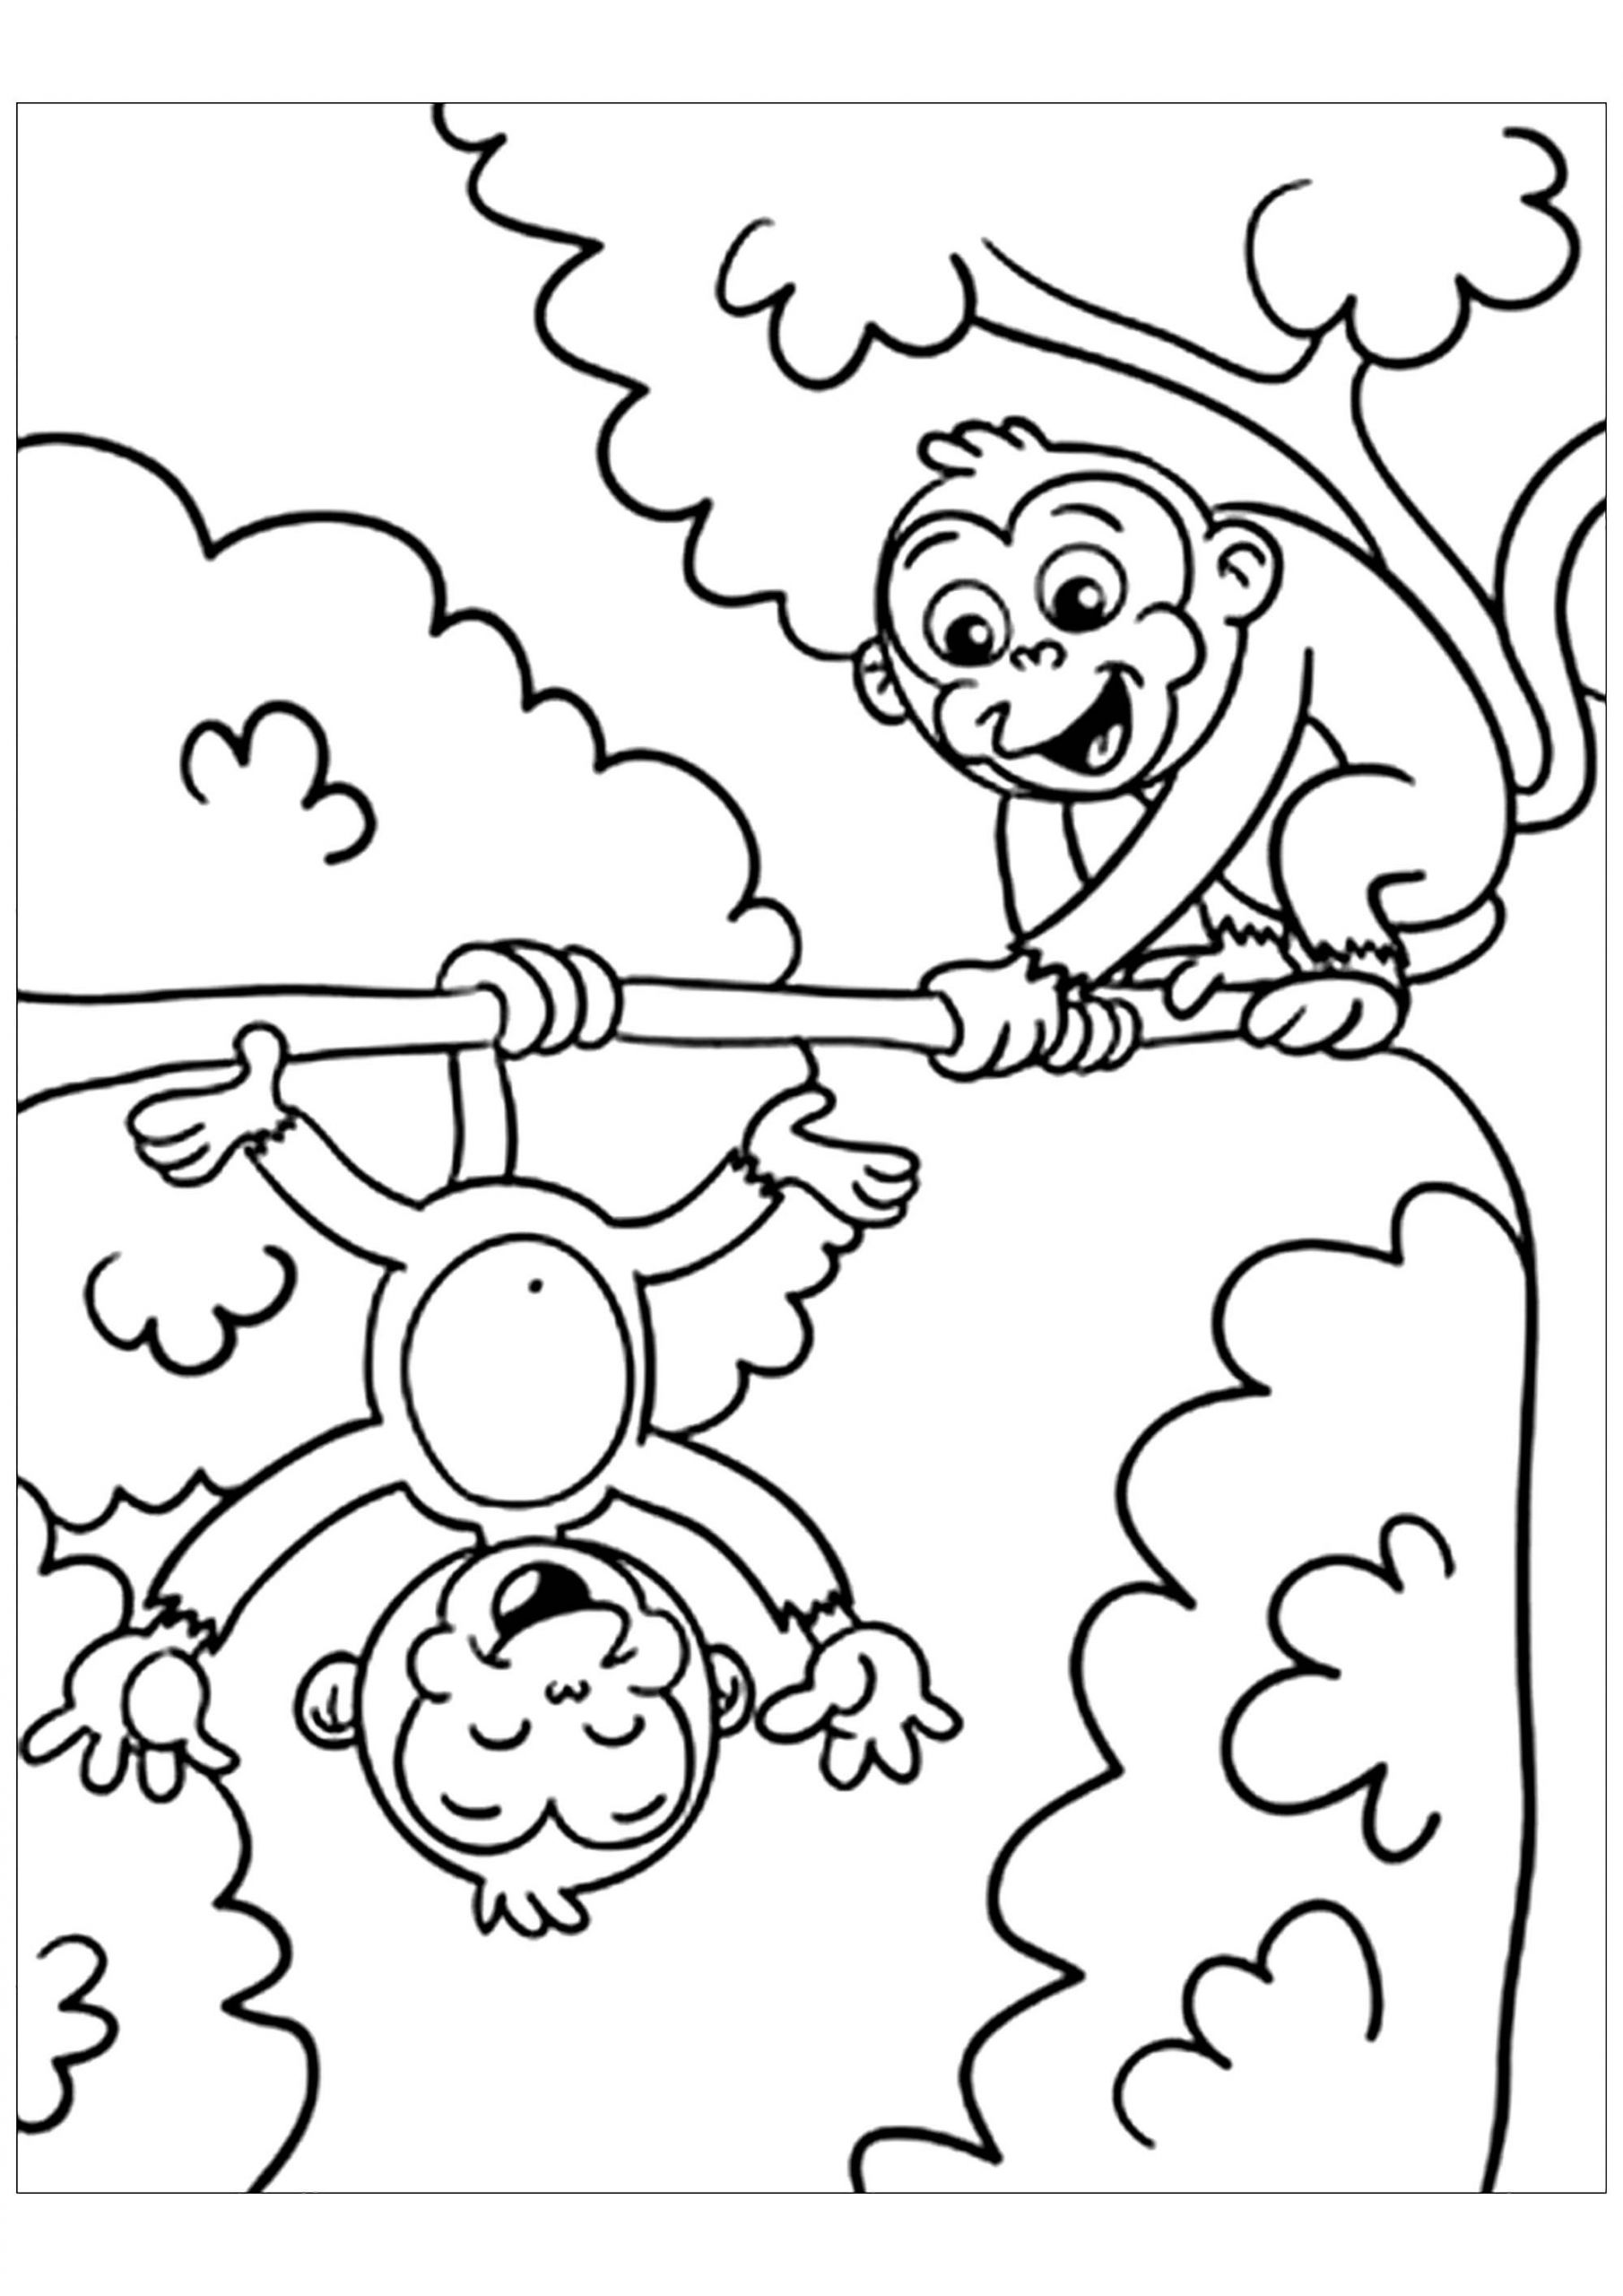 Children Coloring Books
 Monkeys to print for free Monkeys Kids Coloring Pages